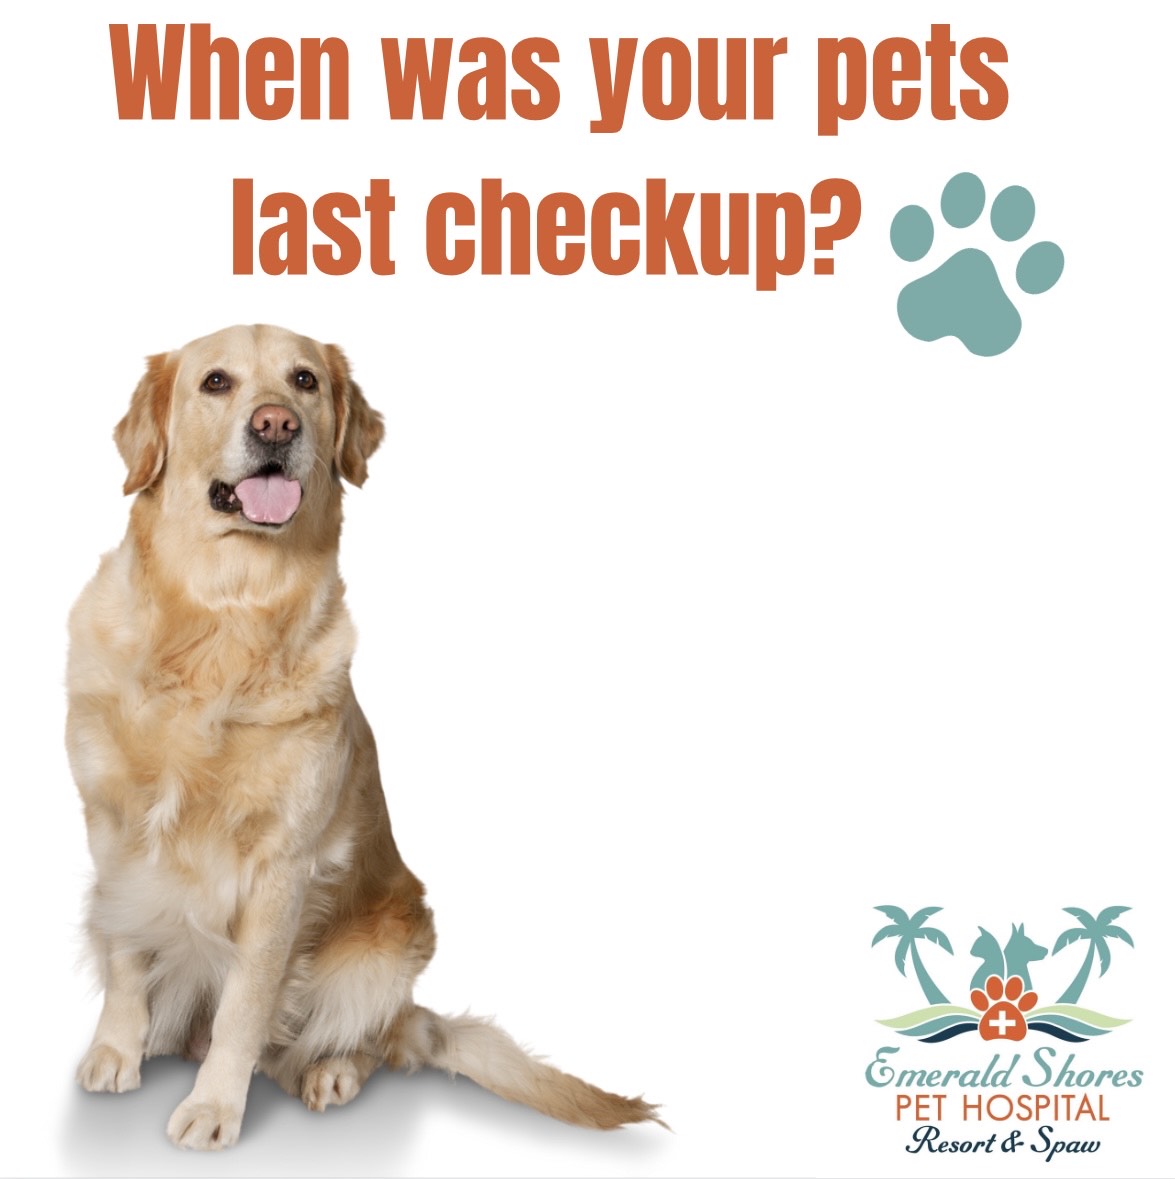 When was your pets last checkup?